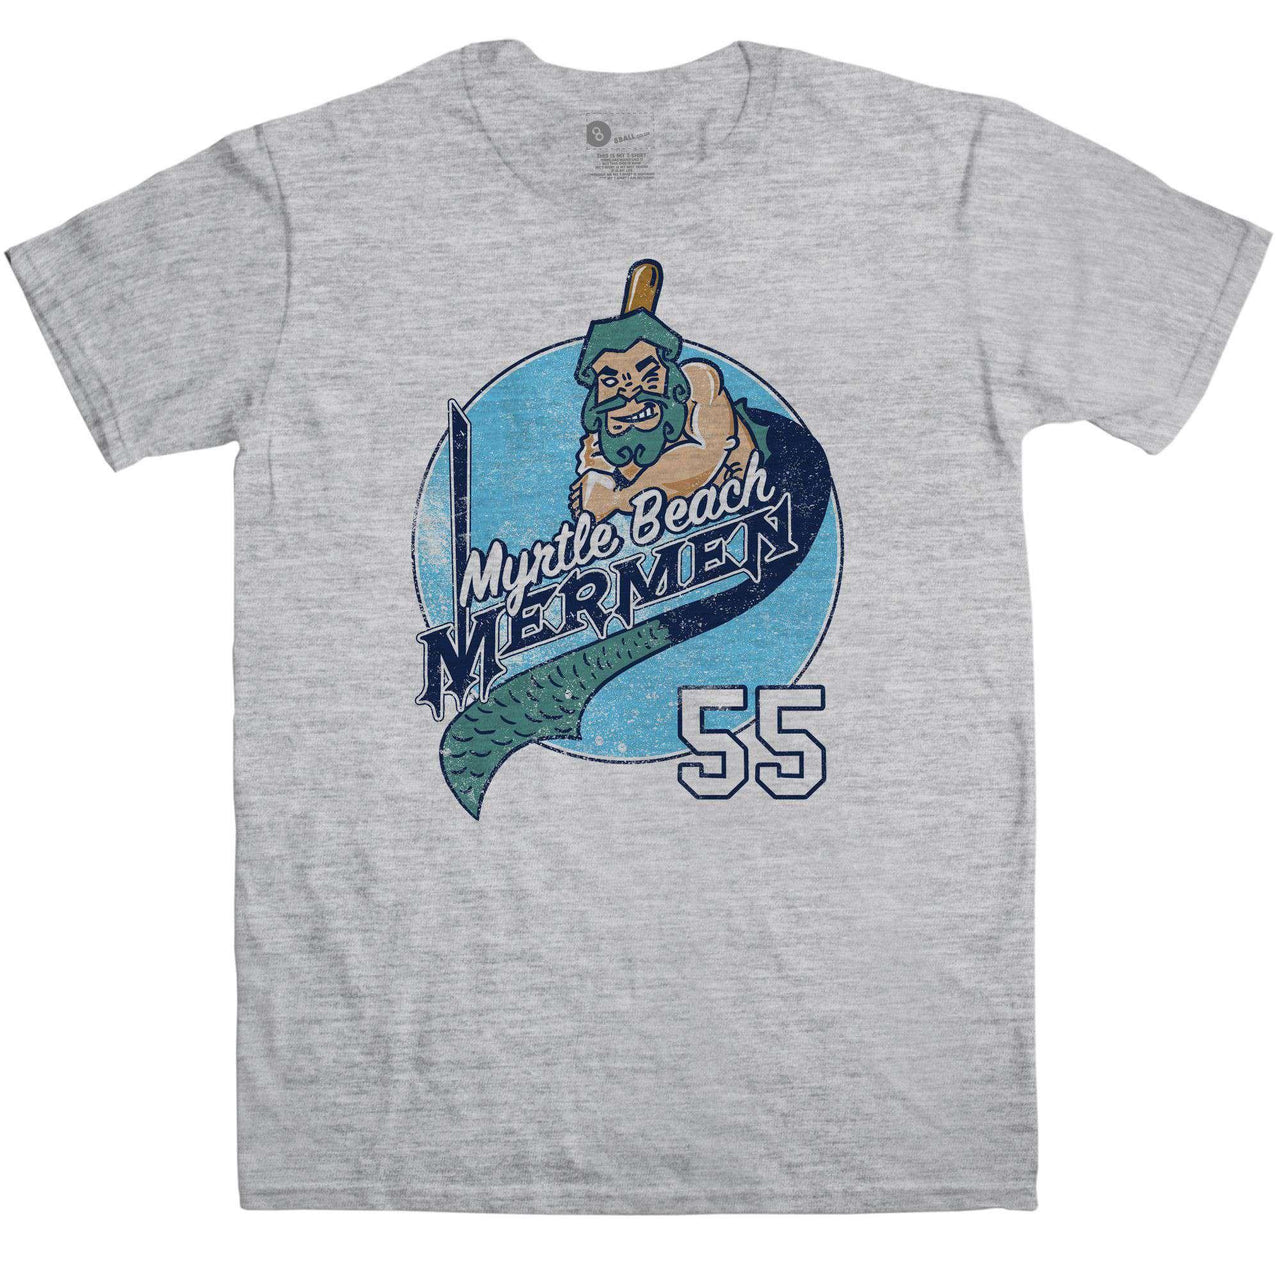 Myrtle Beach Mermen Mens T-Shirt, Inspired By Eastbound And Down 8Ball